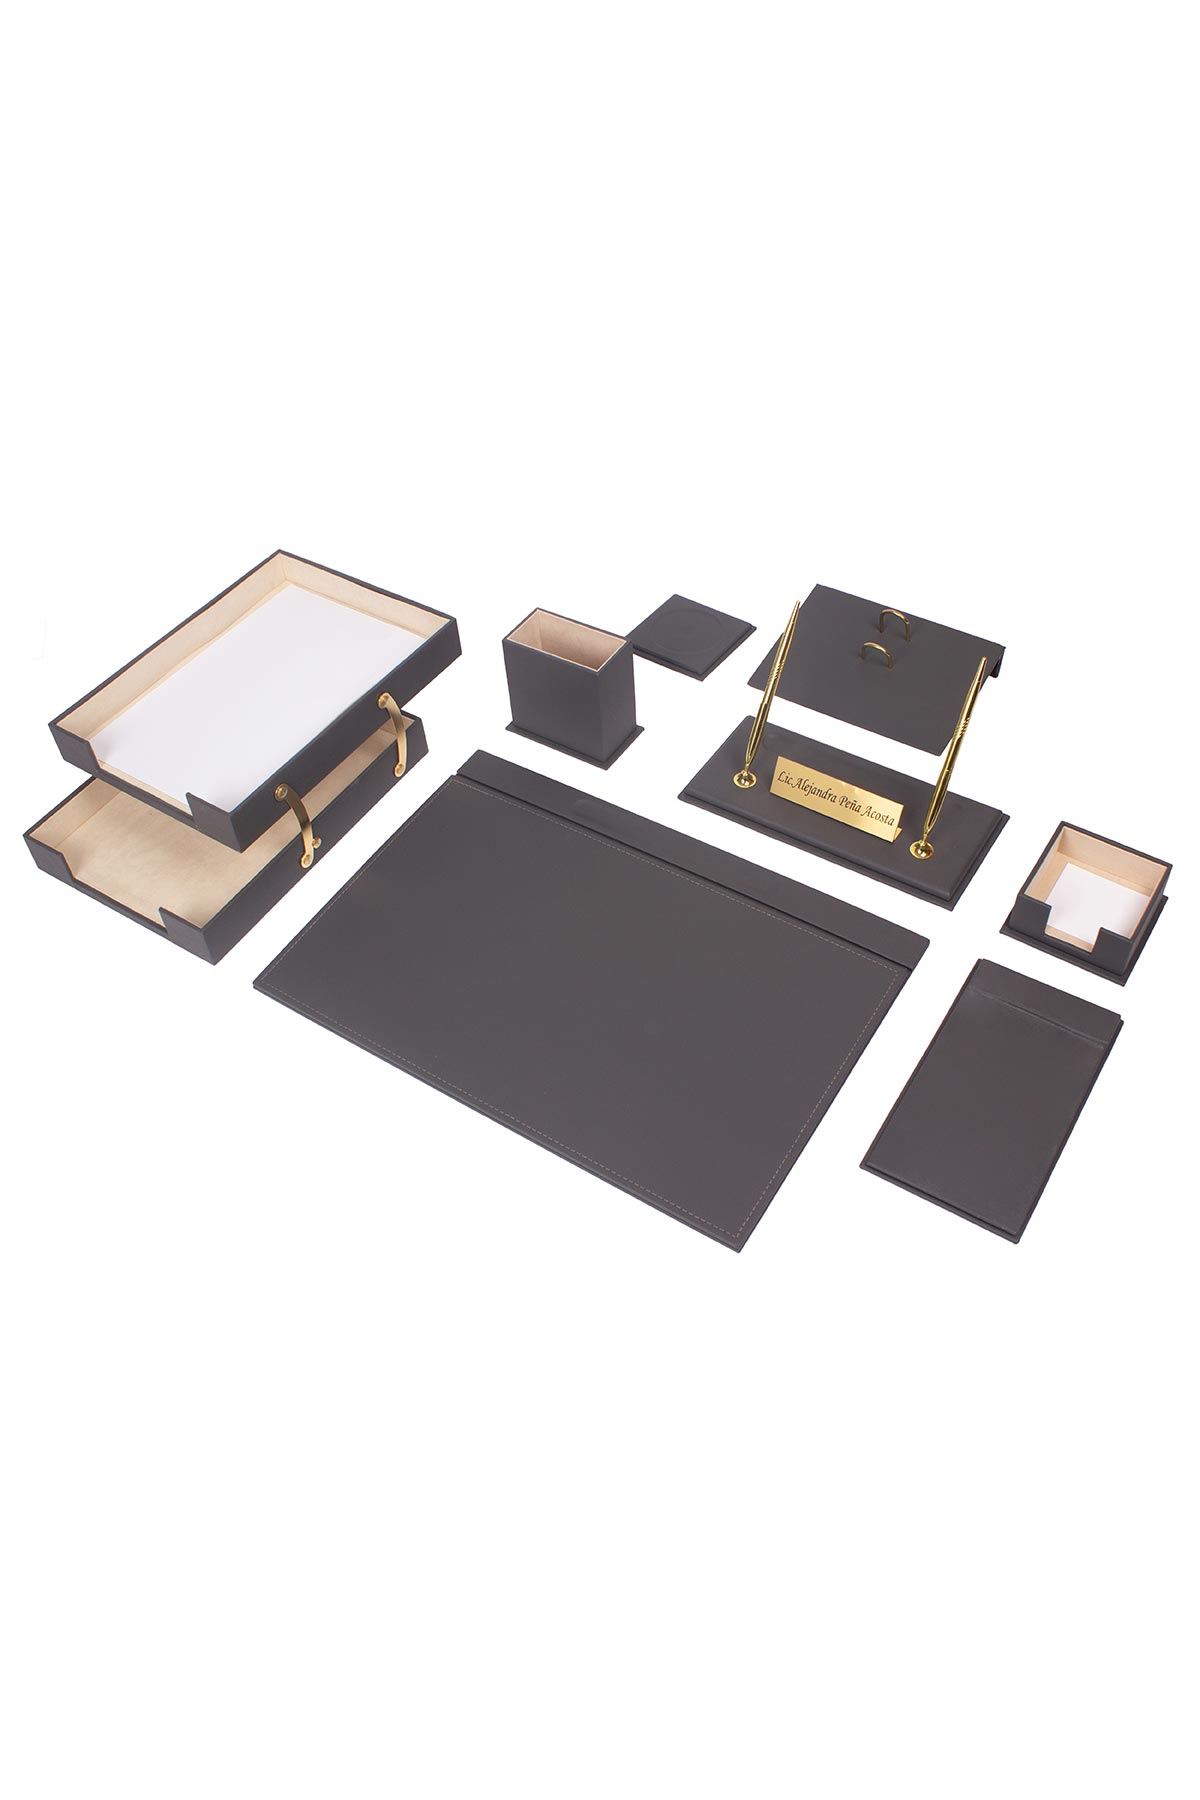 Luxury Leather Desk Set Gray 10 Accessories - Double Document Tray